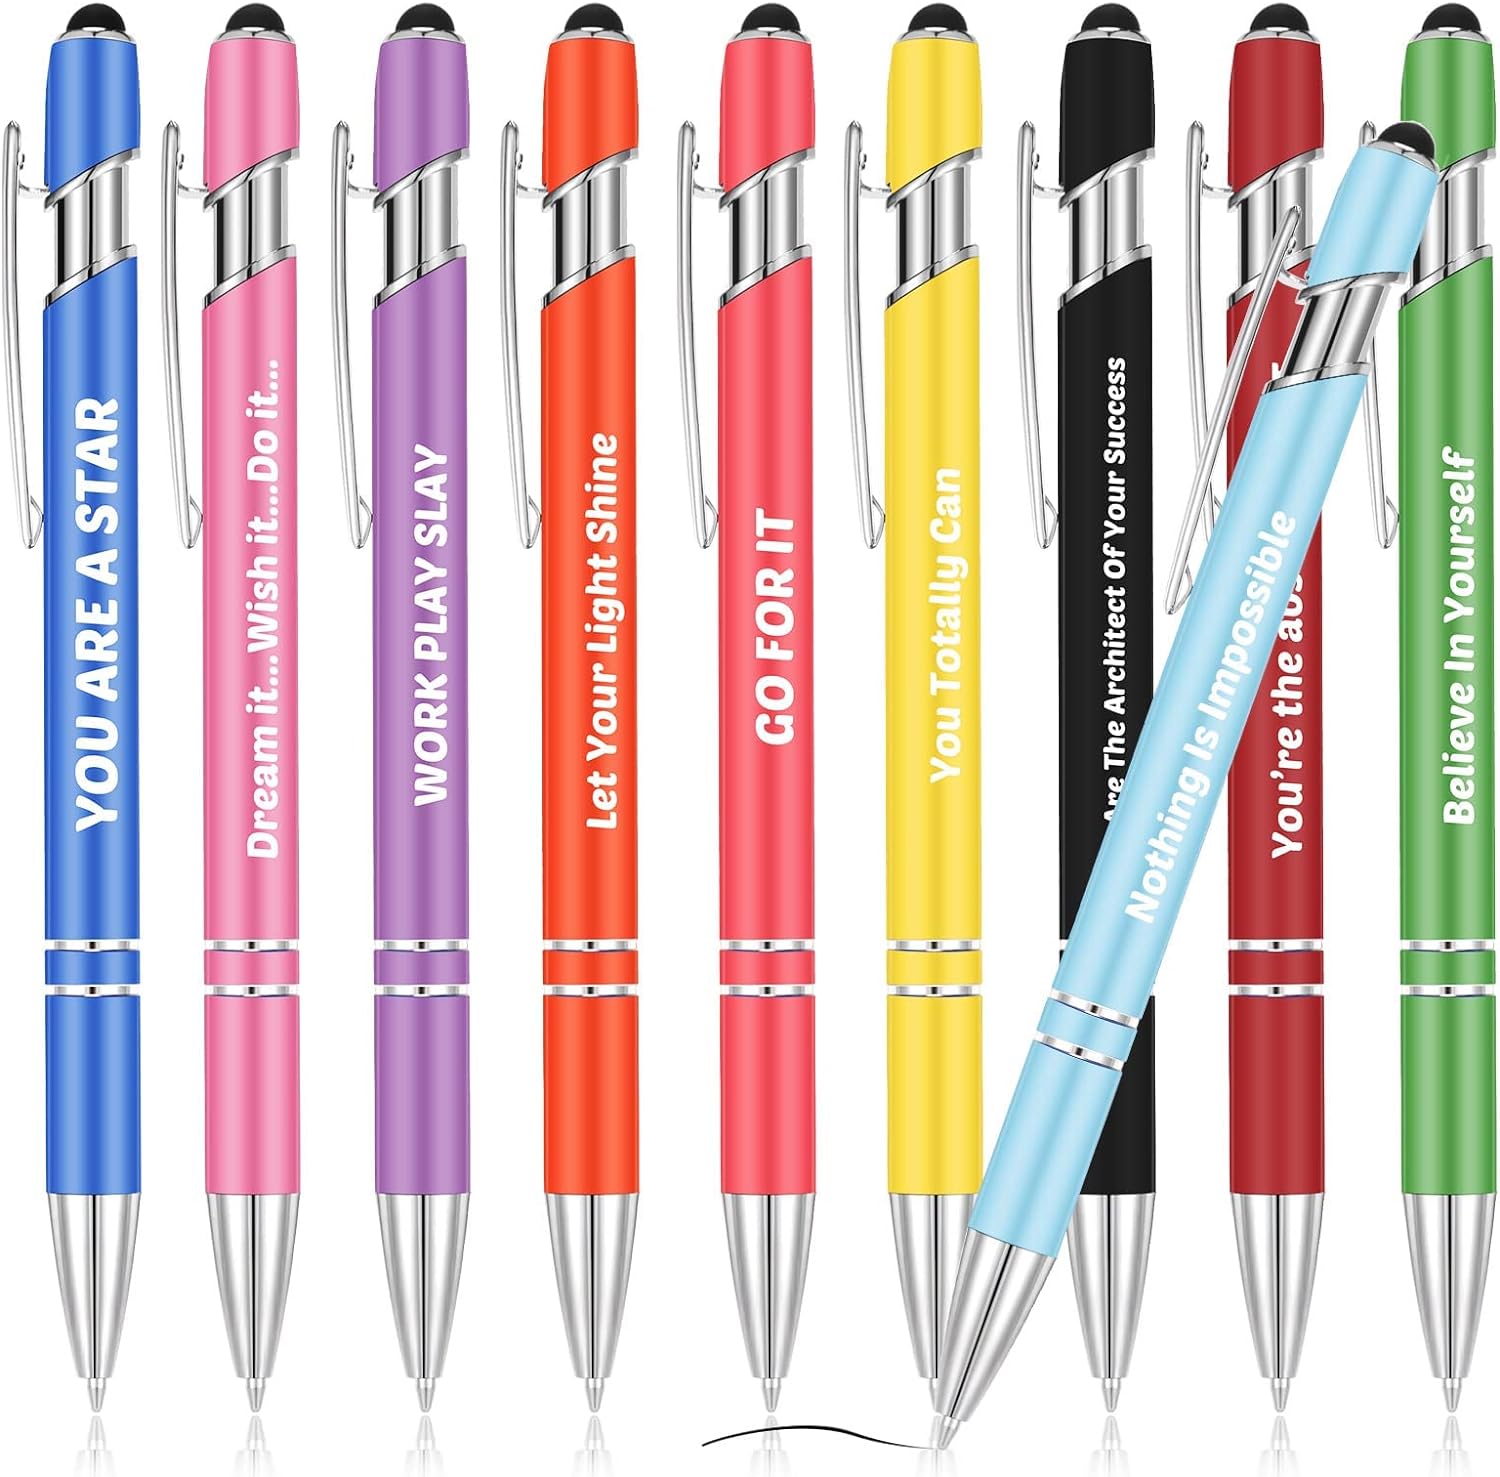 10 Pieces Colorful Ballpoint Pens with Inspirational Quotes personalized Screen Touch Stylus Pen Metal Inspirational Pens Encouraging Nurse Pens for Work Black Ink Motivational Pens for Men Women